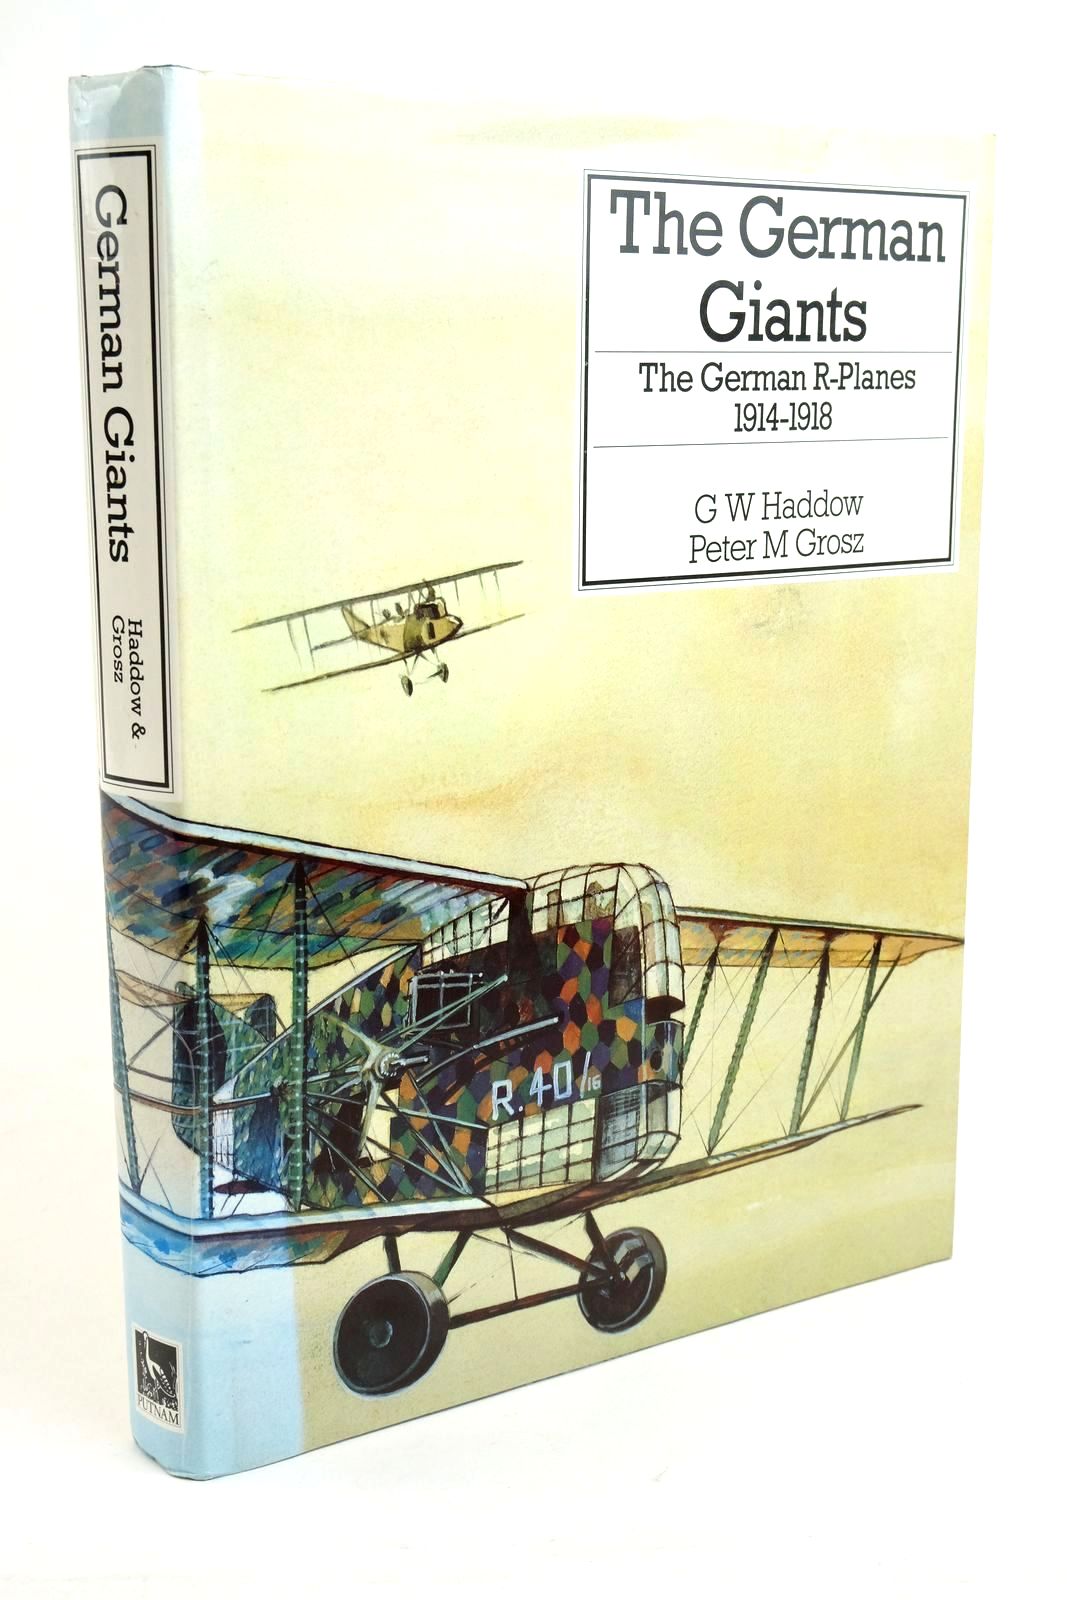 Photo of THE GERMAN GIANTS THE GERMAN R-PLANES 1914-1918 written by Haddow, G.W.
Grosz, Peter M. published by Putnam (STOCK CODE: 1322051)  for sale by Stella & Rose's Books